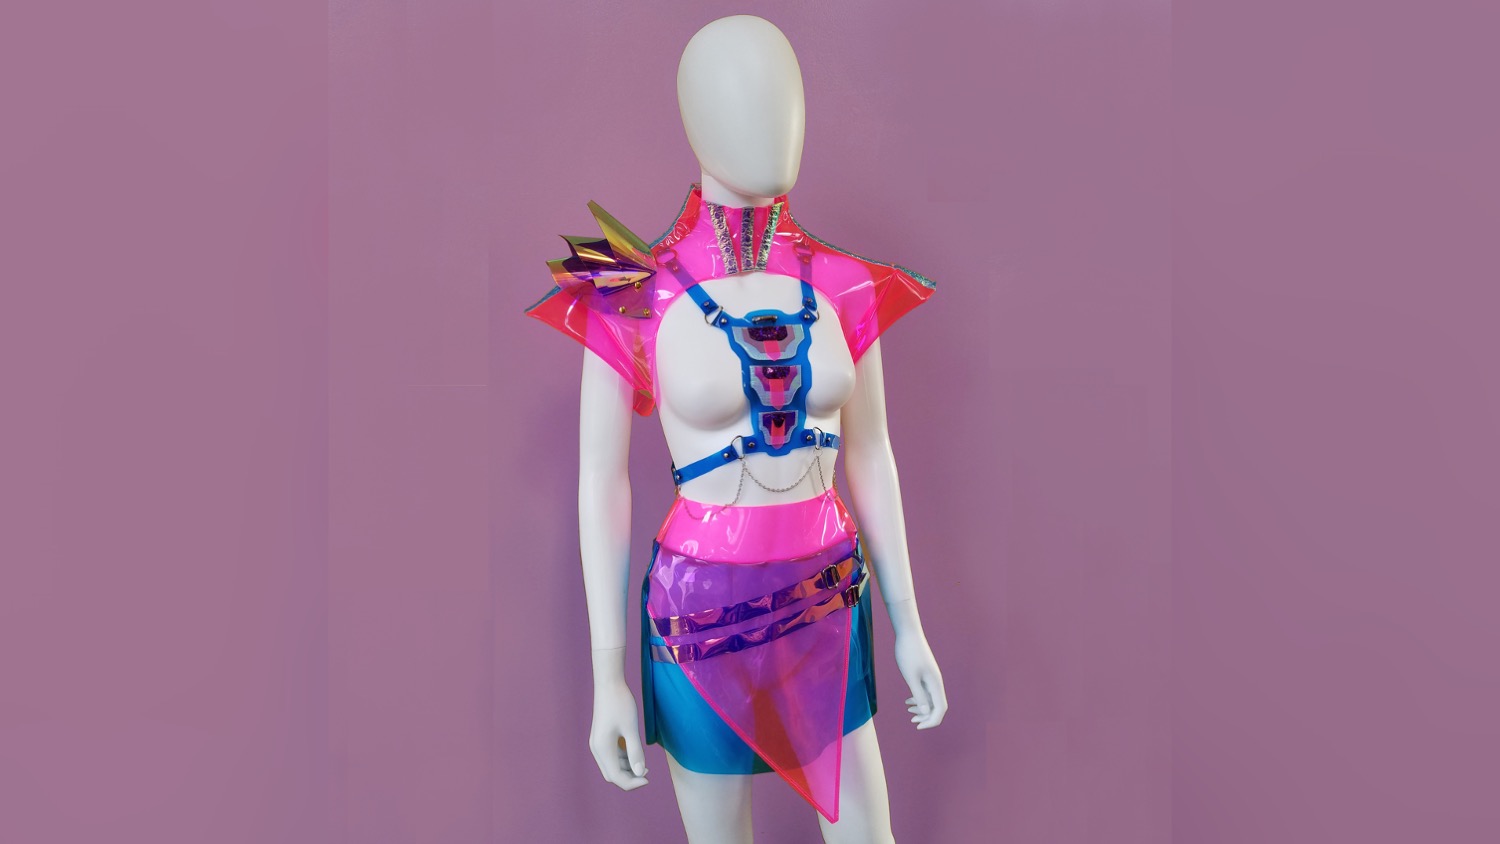 Vibrant clothing designs on a mannequin, part of an avant-garde fashion design line.